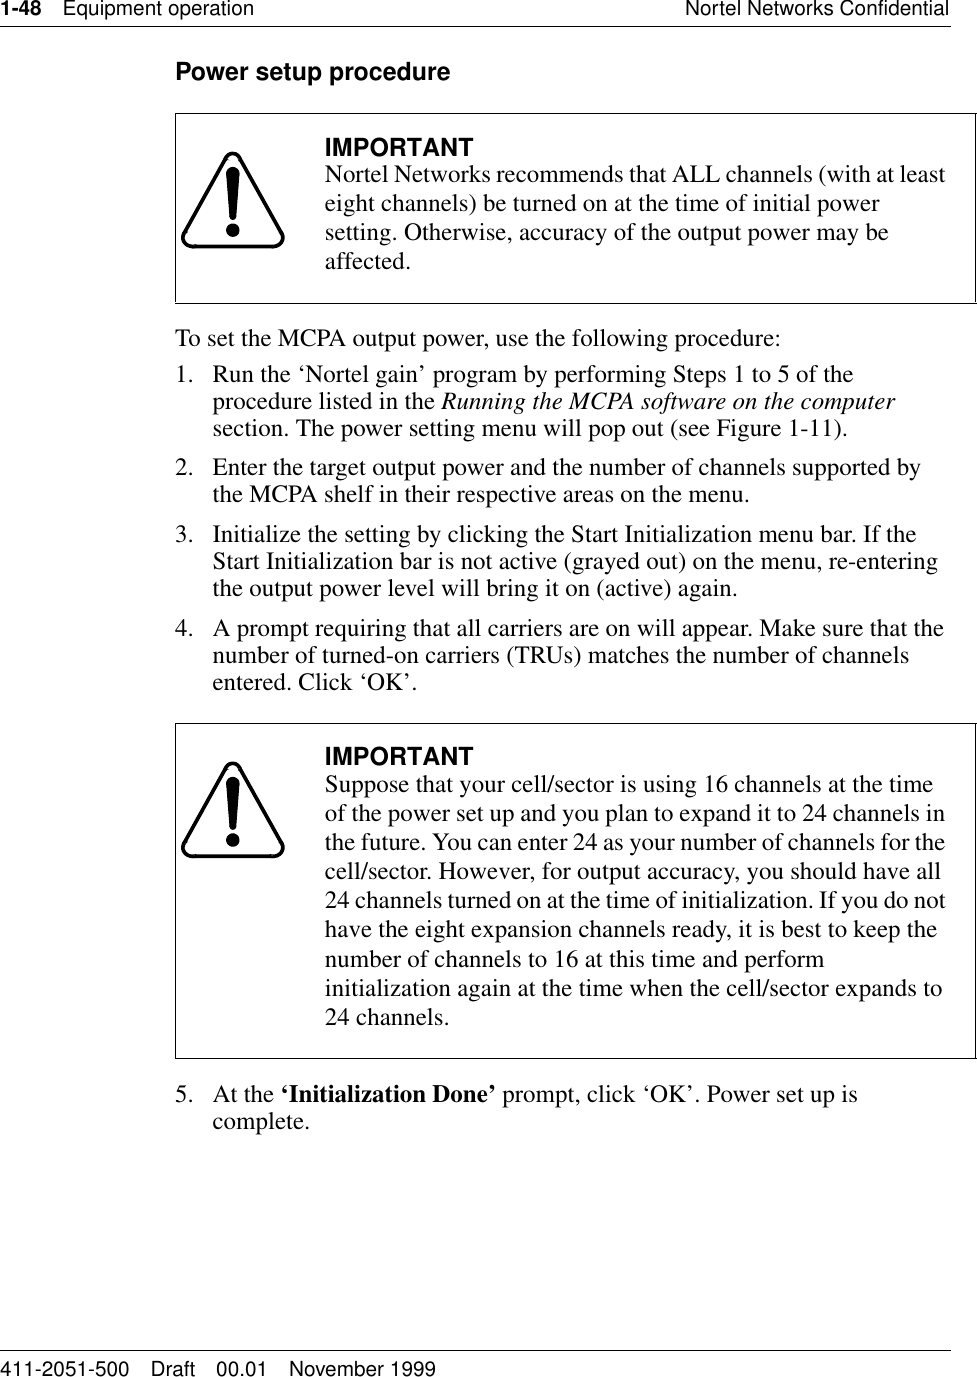 1-48 Equipment operation Nortel Networks Confidential411-2051-500 Draft 00.01 November 1999Power setup procedureTo set the MCPA output power, use the following procedure:1. Run the ‘Nortel gain’ program by performing Steps 1 to 5 of the procedure listed in the Running the MCPA software on the computer section. The power setting menu will pop out (see Figure 1-11).2. Enter the target output power and the number of channels supported by the MCPA shelf in their respective areas on the menu.3. Initialize the setting by clicking the Start Initialization menu bar. If the Start Initialization bar is not active (grayed out) on the menu, re-entering the output power level will bring it on (active) again.4. A prompt requiring that all carriers are on will appear. Make sure that the number of turned-on carriers (TRUs) matches the number of channels entered. Click ‘OK’.5. At the ‘Initialization Done’ prompt, click ‘OK’. Power set up is complete.IMPORTANTNortel Networks recommends that ALL channels (with at least eight channels) be turned on at the time of initial power setting. Otherwise, accuracy of the output power may be affected.IMPORTANTSuppose that your cell/sector is using 16 channels at the time of the power set up and you plan to expand it to 24 channels in the future. You can enter 24 as your number of channels for the cell/sector. However, for output accuracy, you should have all 24 channels turned on at the time of initialization. If you do not have the eight expansion channels ready, it is best to keep the number of channels to 16 at this time and perform initialization again at the time when the cell/sector expands to 24 channels.